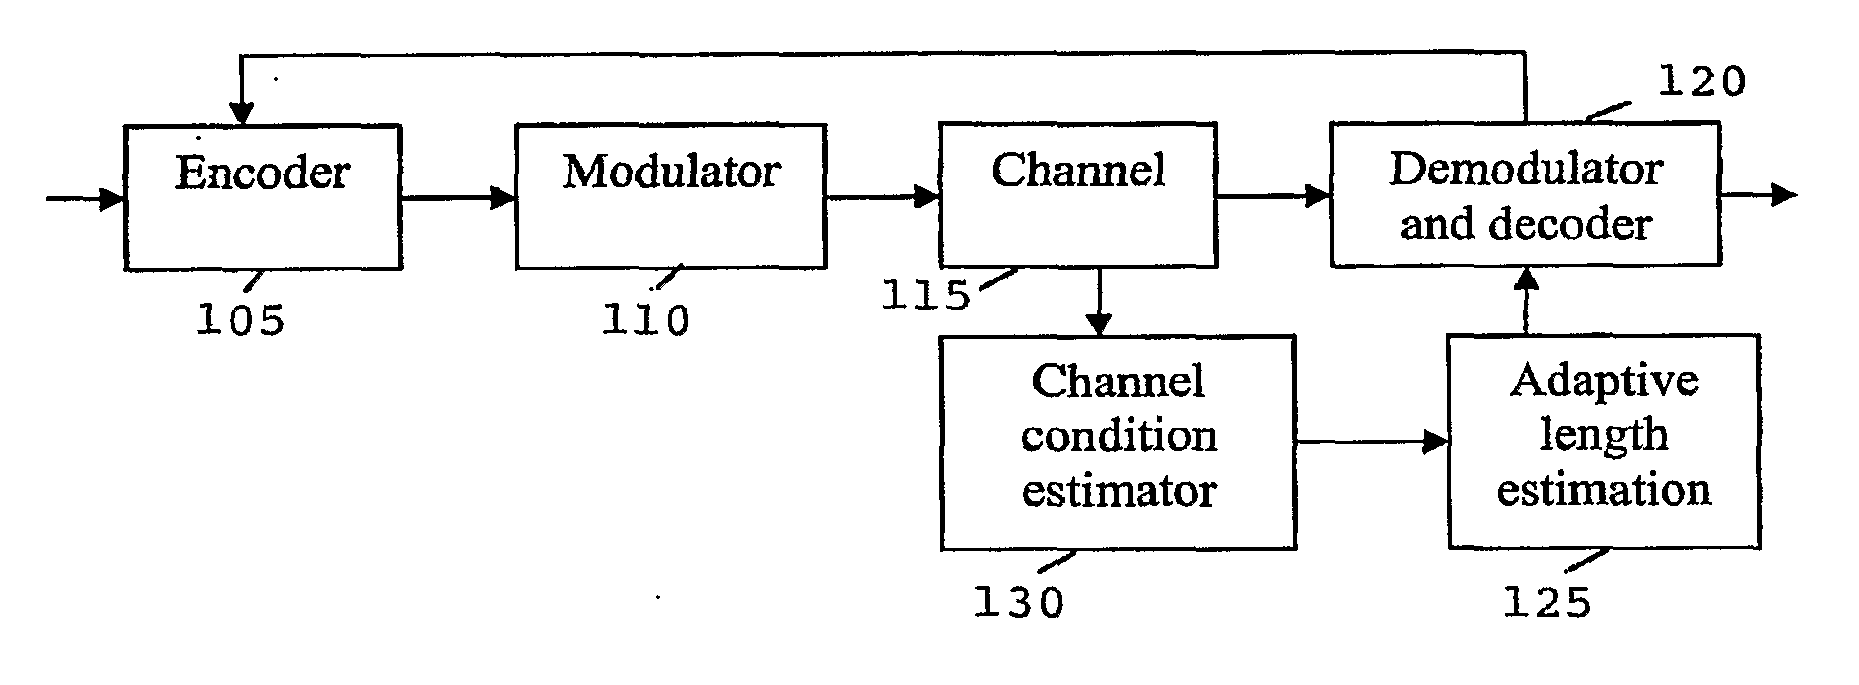 Method and apparatus for improving throughput and error performance of rateless coding systems